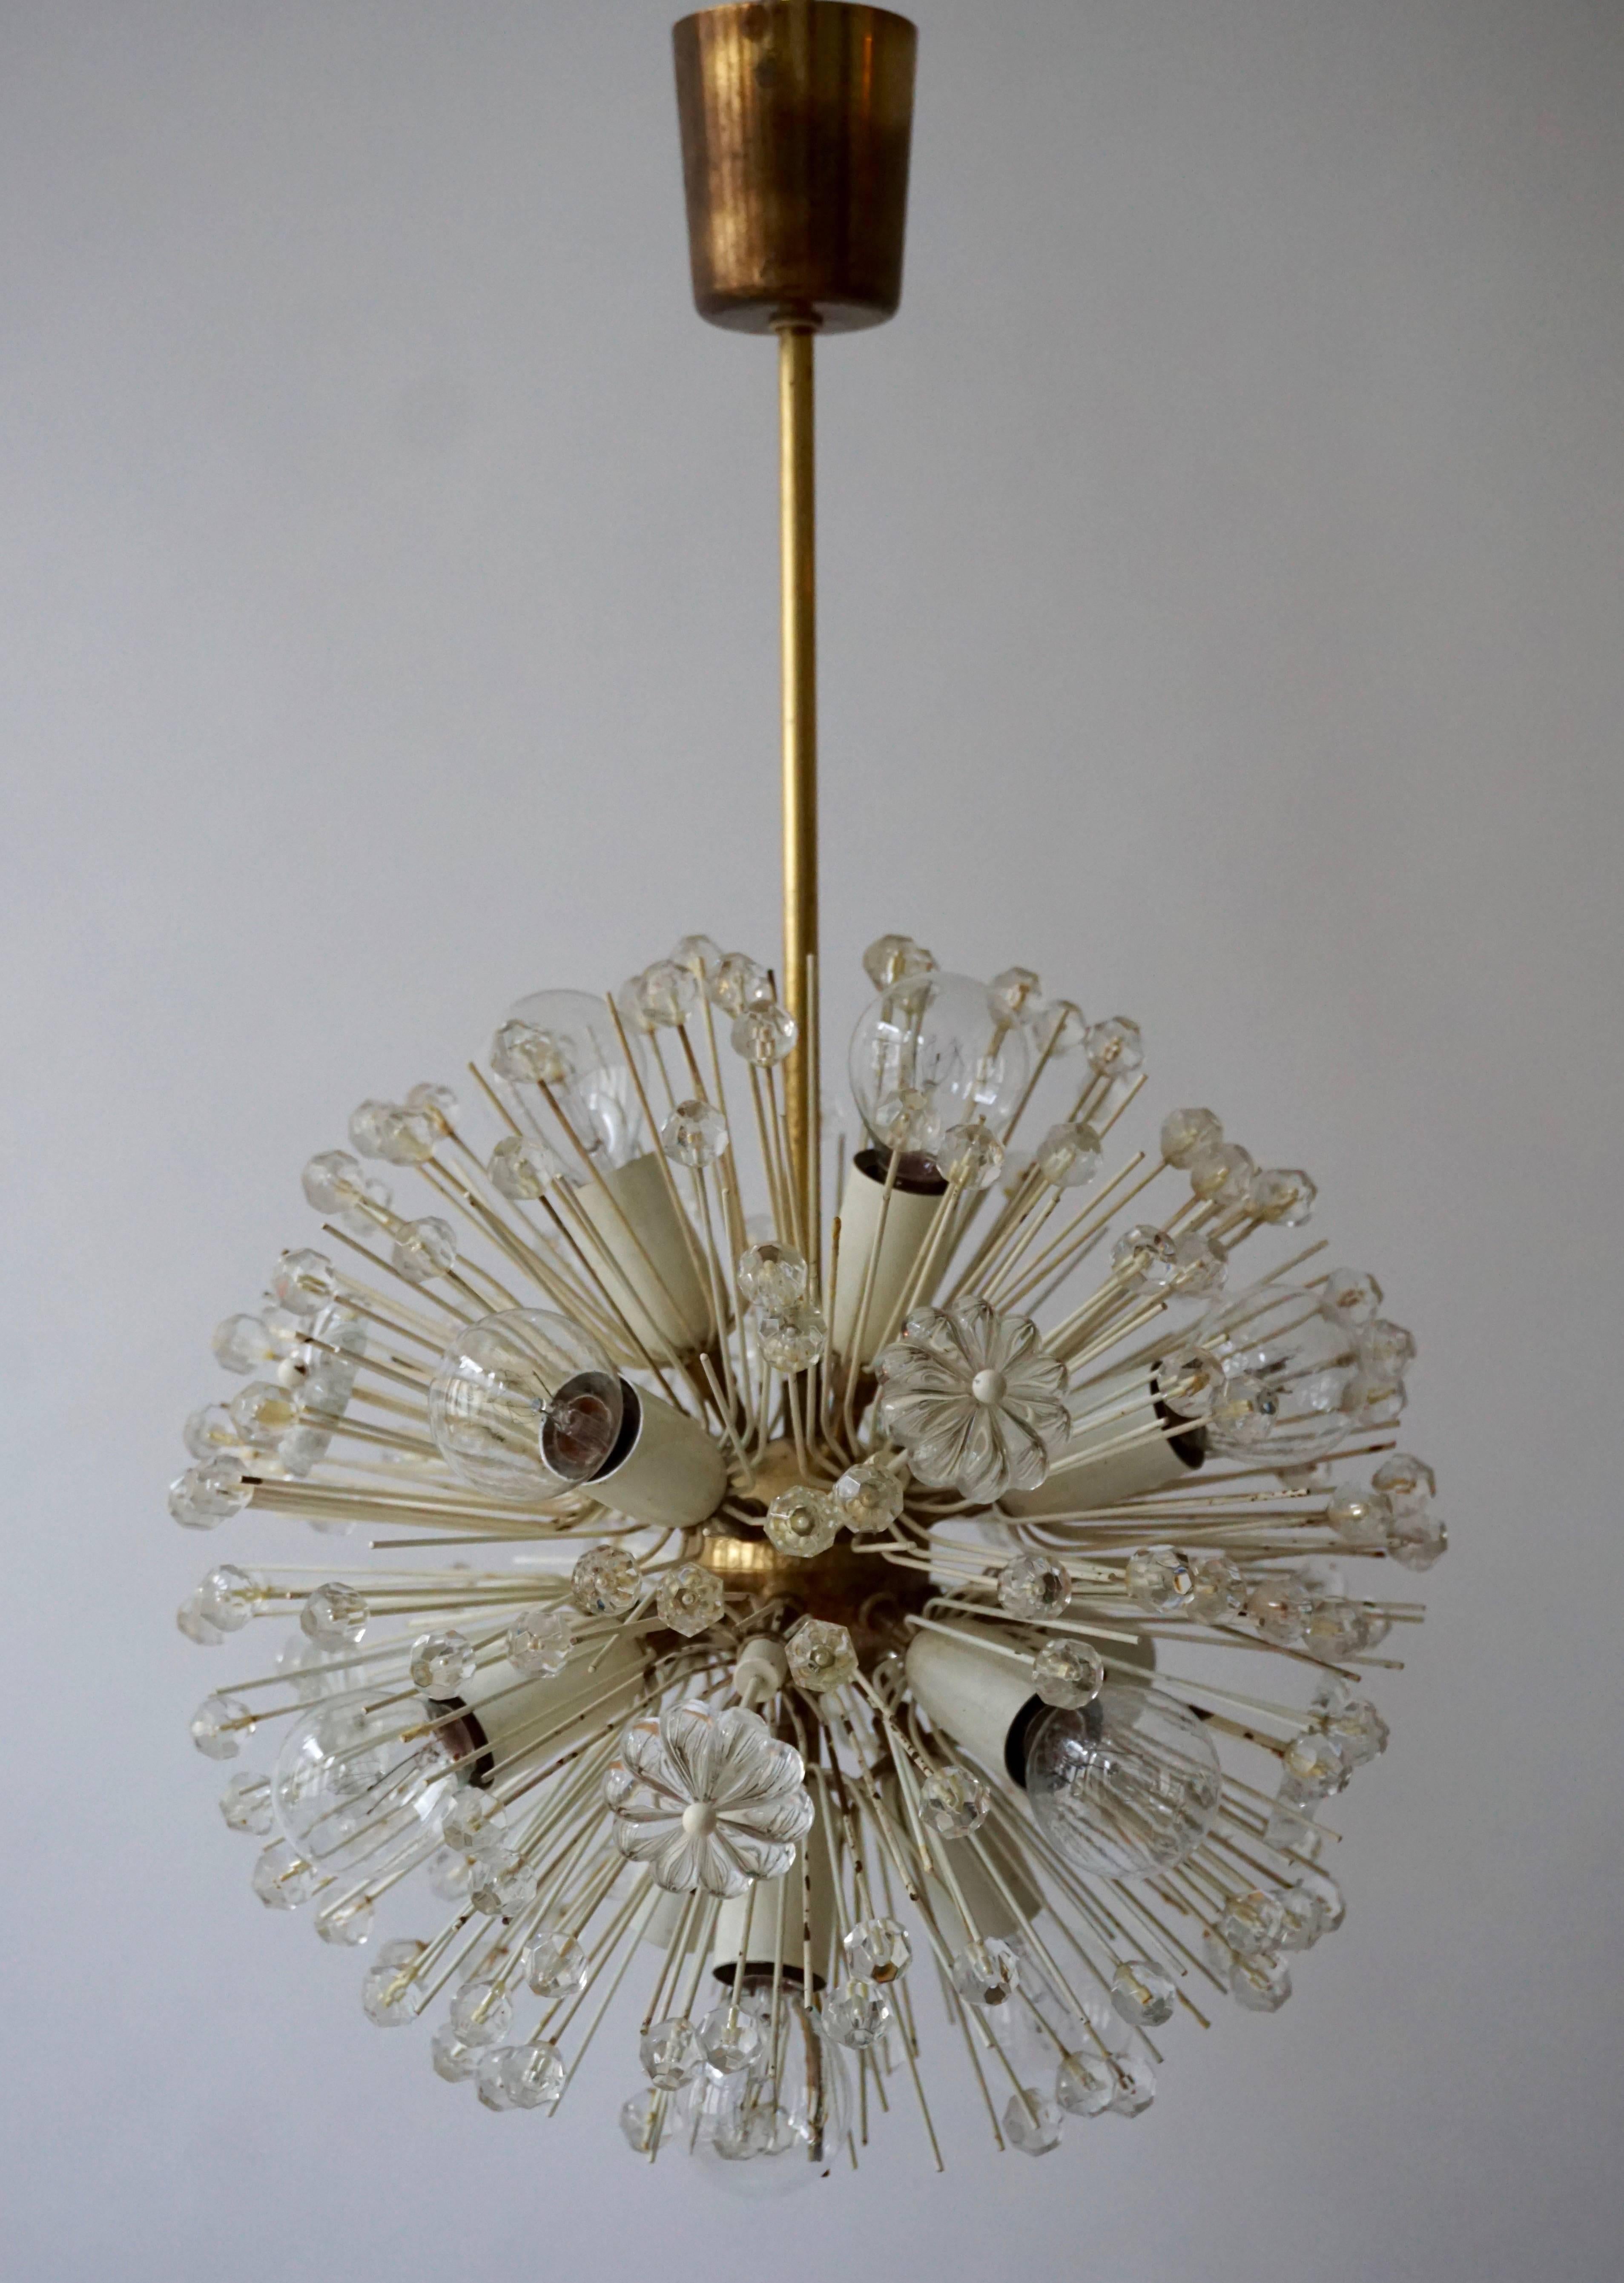 Sputnik thirteen-light brass fixture with copious amounts of Austrian crystals by Emil Stejnar for Nikoll. Cosmological. This glamorous delicate brass ‘Snowball’ Sputnik chandelier is also known as ‘pusteblume’, or ‘snowflake’ and is made in Vienna